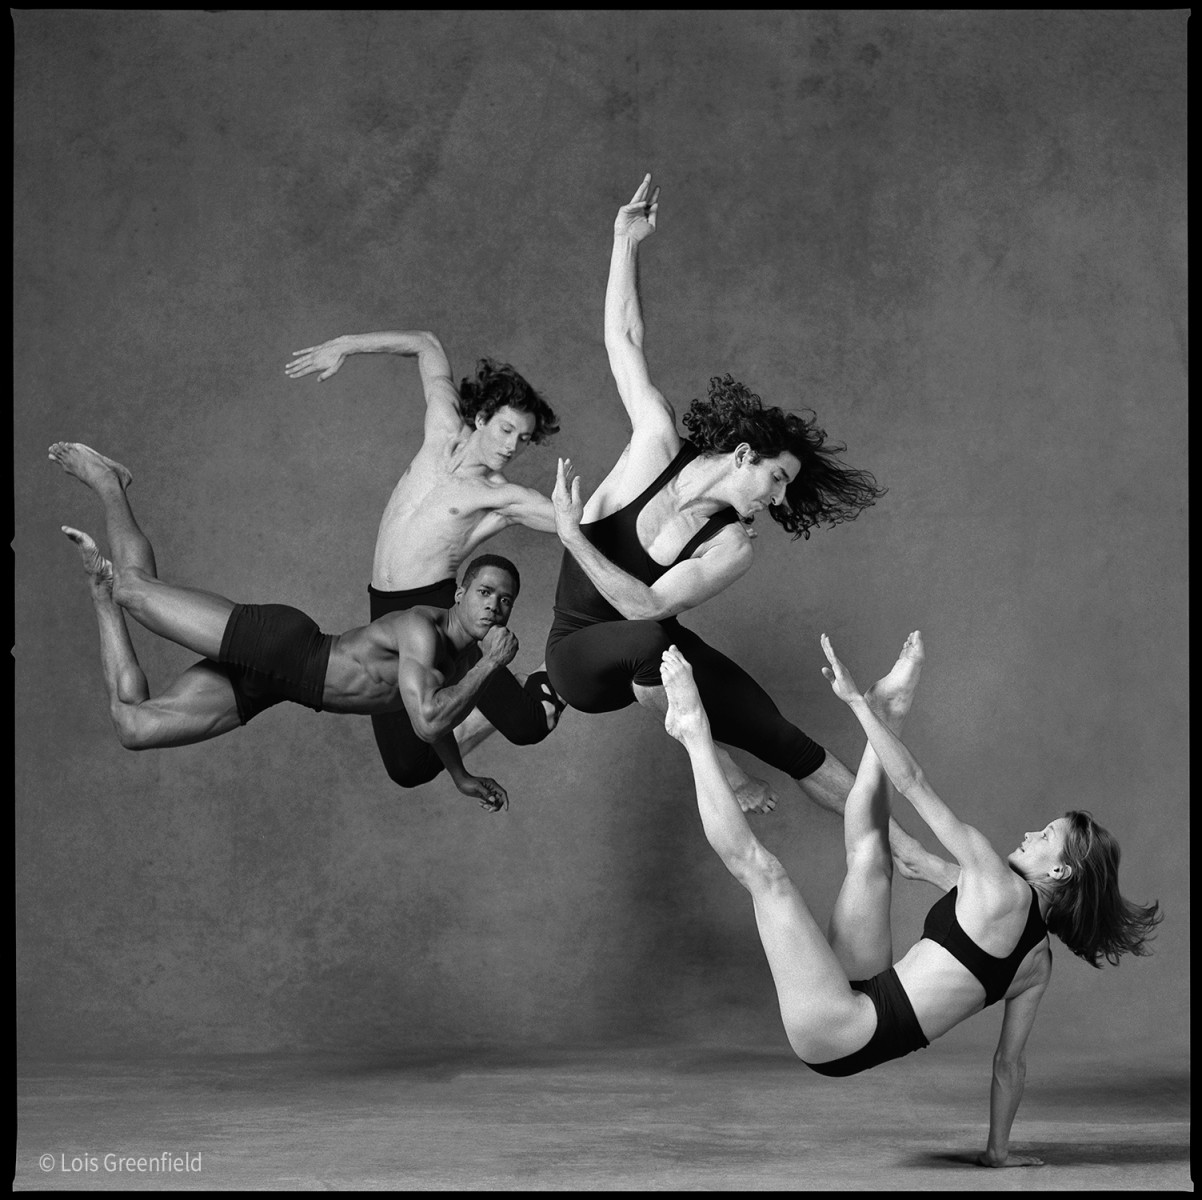 dancers appearing to float in mid air captured by genius photographer Lois Greenfield